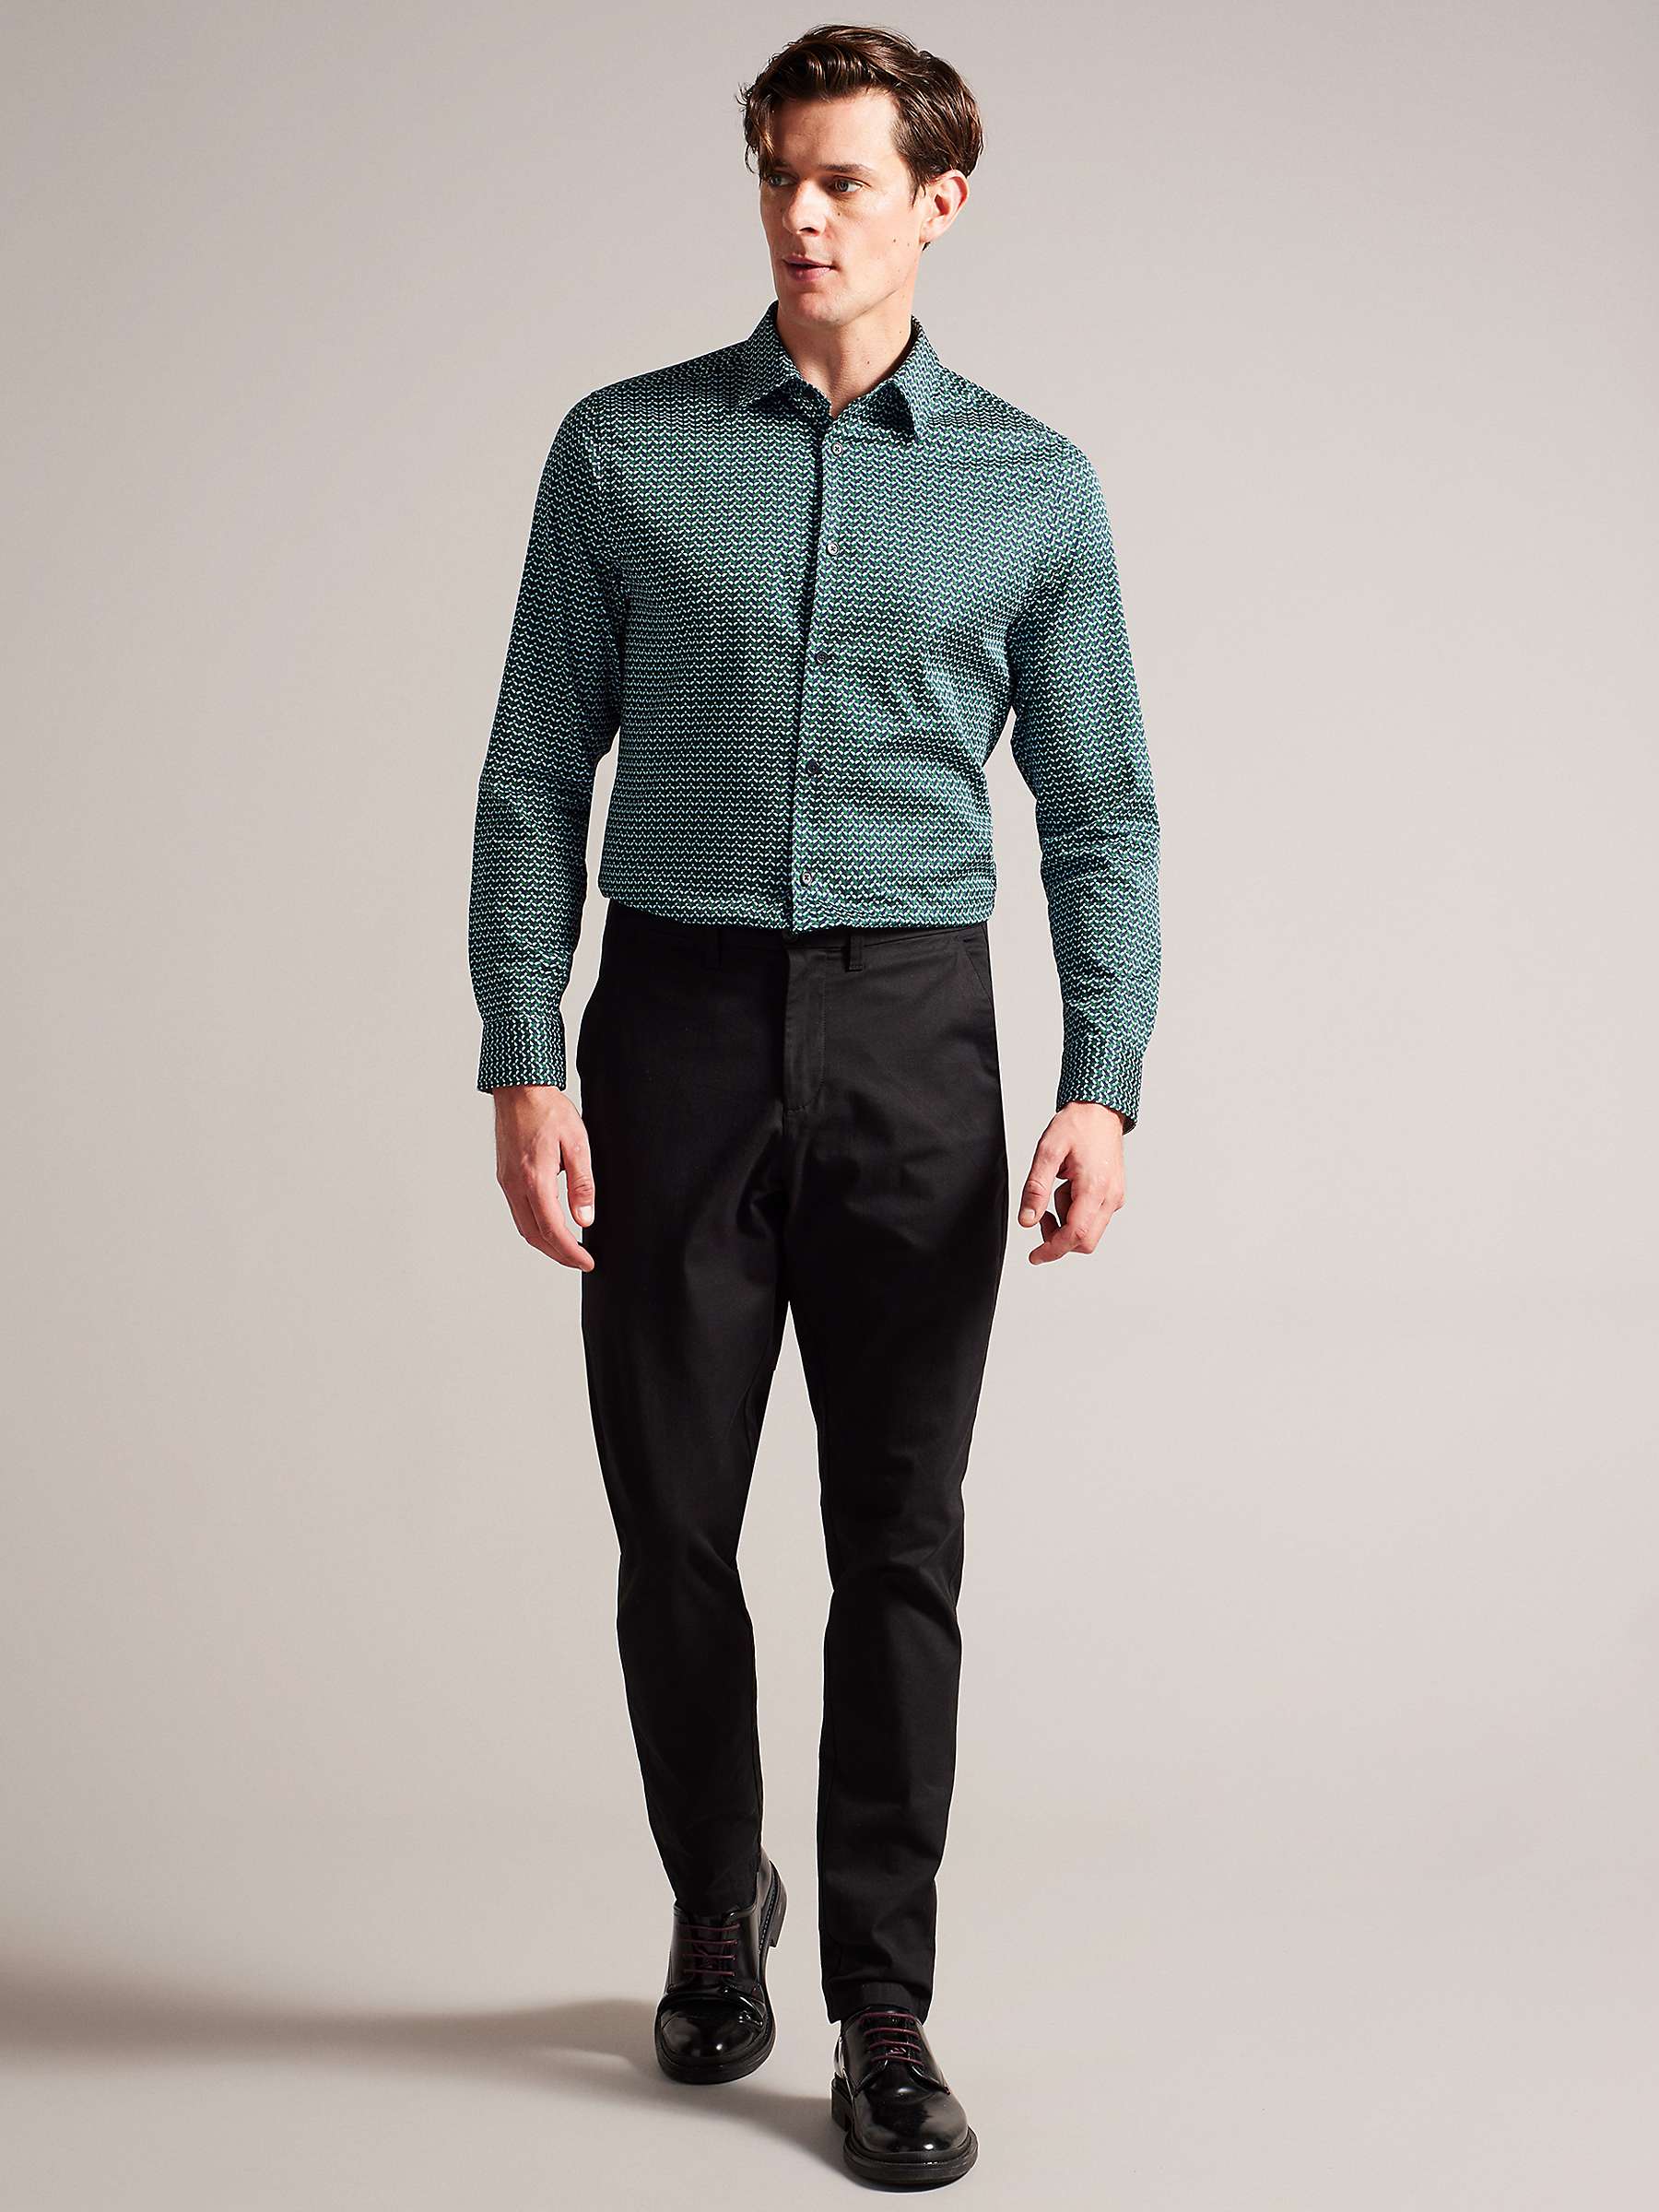 Buy Ted Baker Laceby Geometric Printed Long Sleeve Shirt Online at johnlewis.com